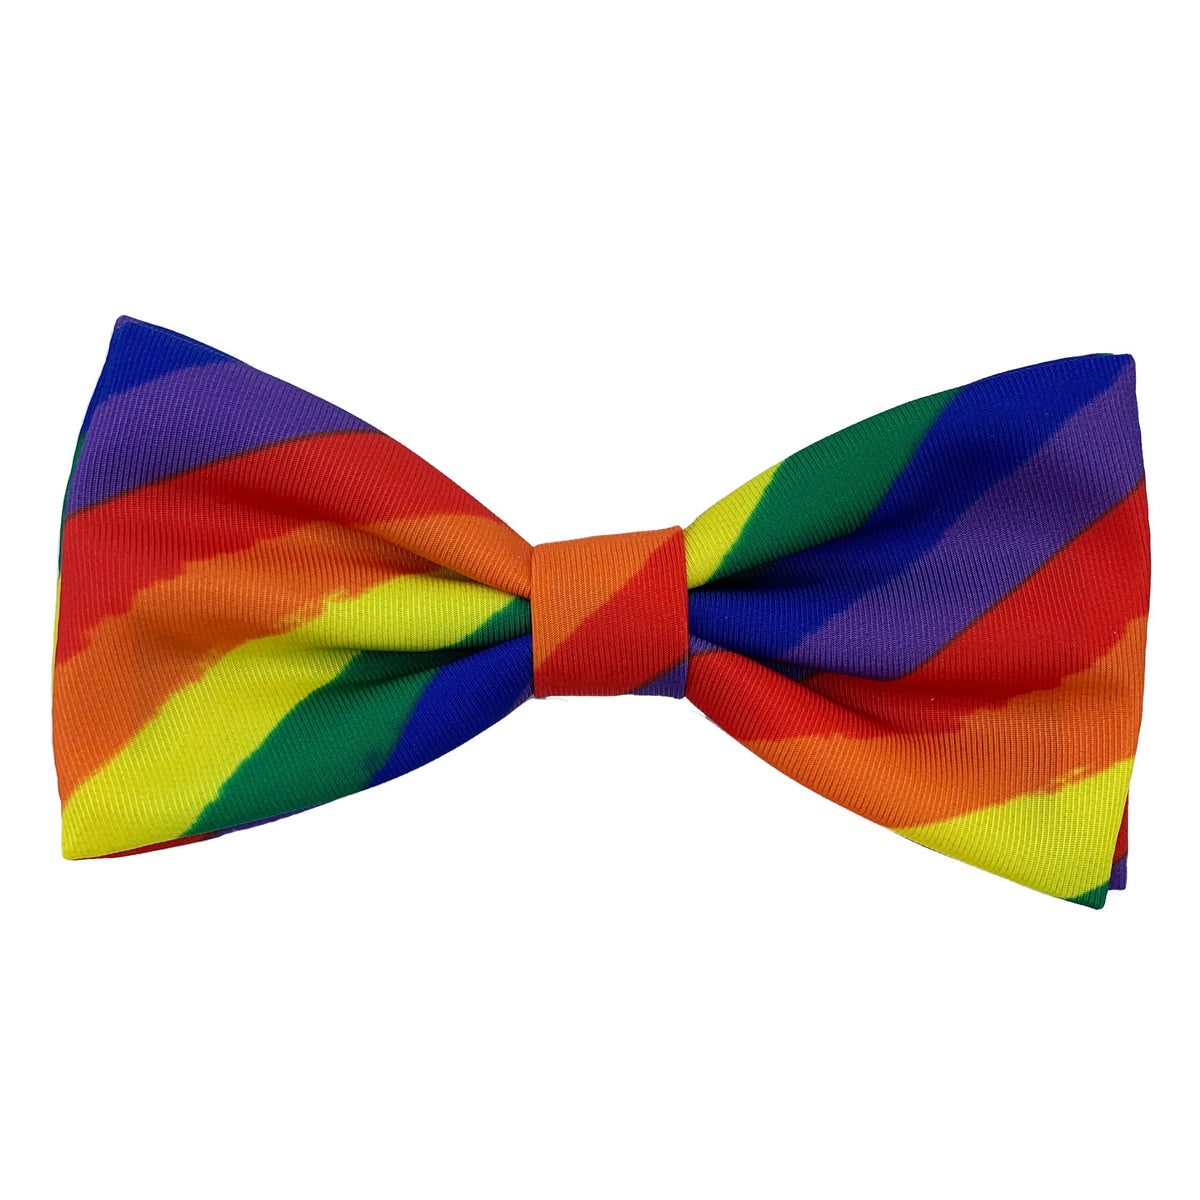 Huxley &amp; Kent - Equality Bow Tie